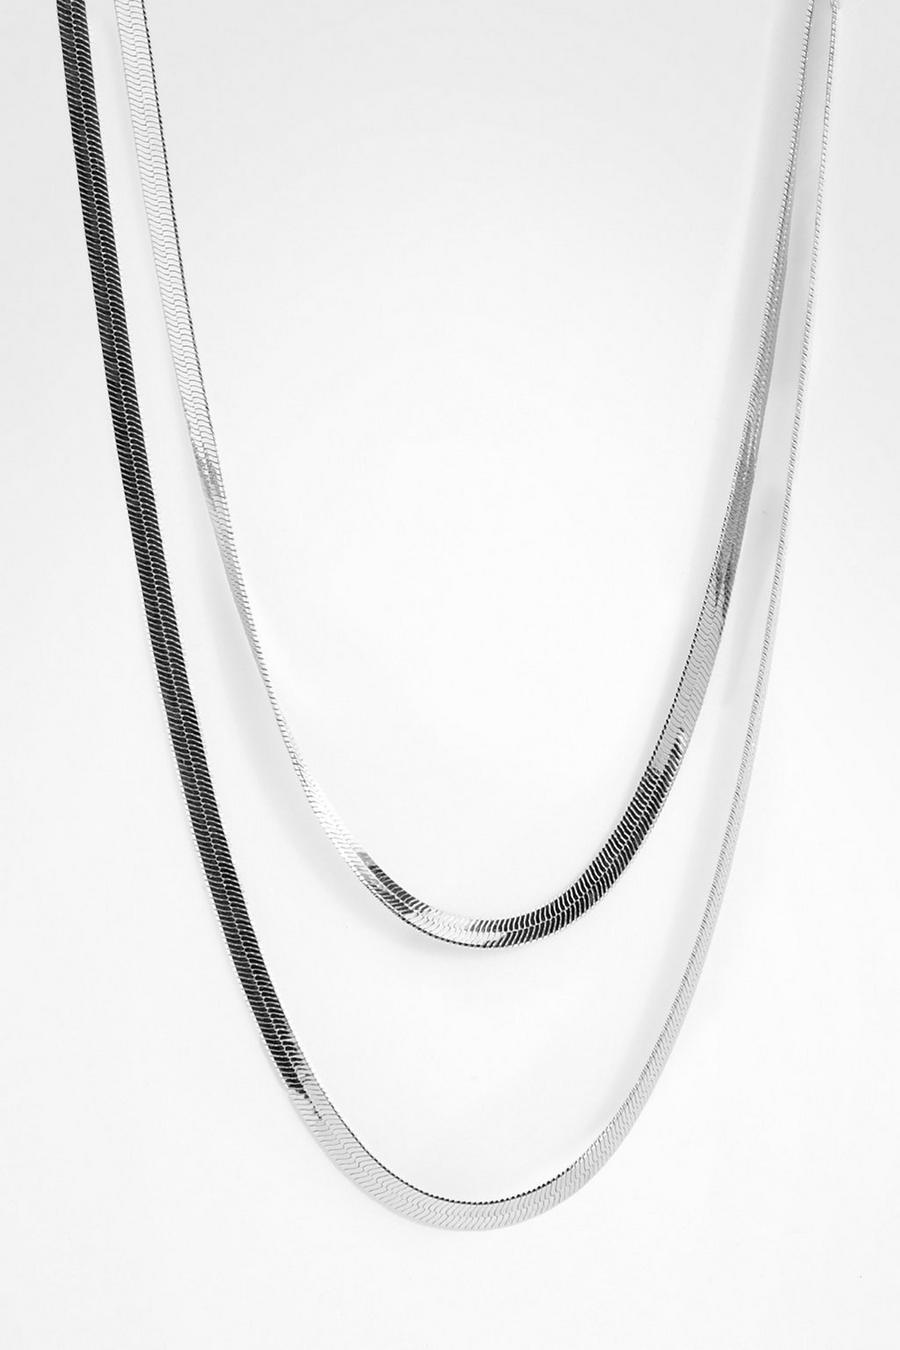 Silver Gold Flat Snake Chain Necklace